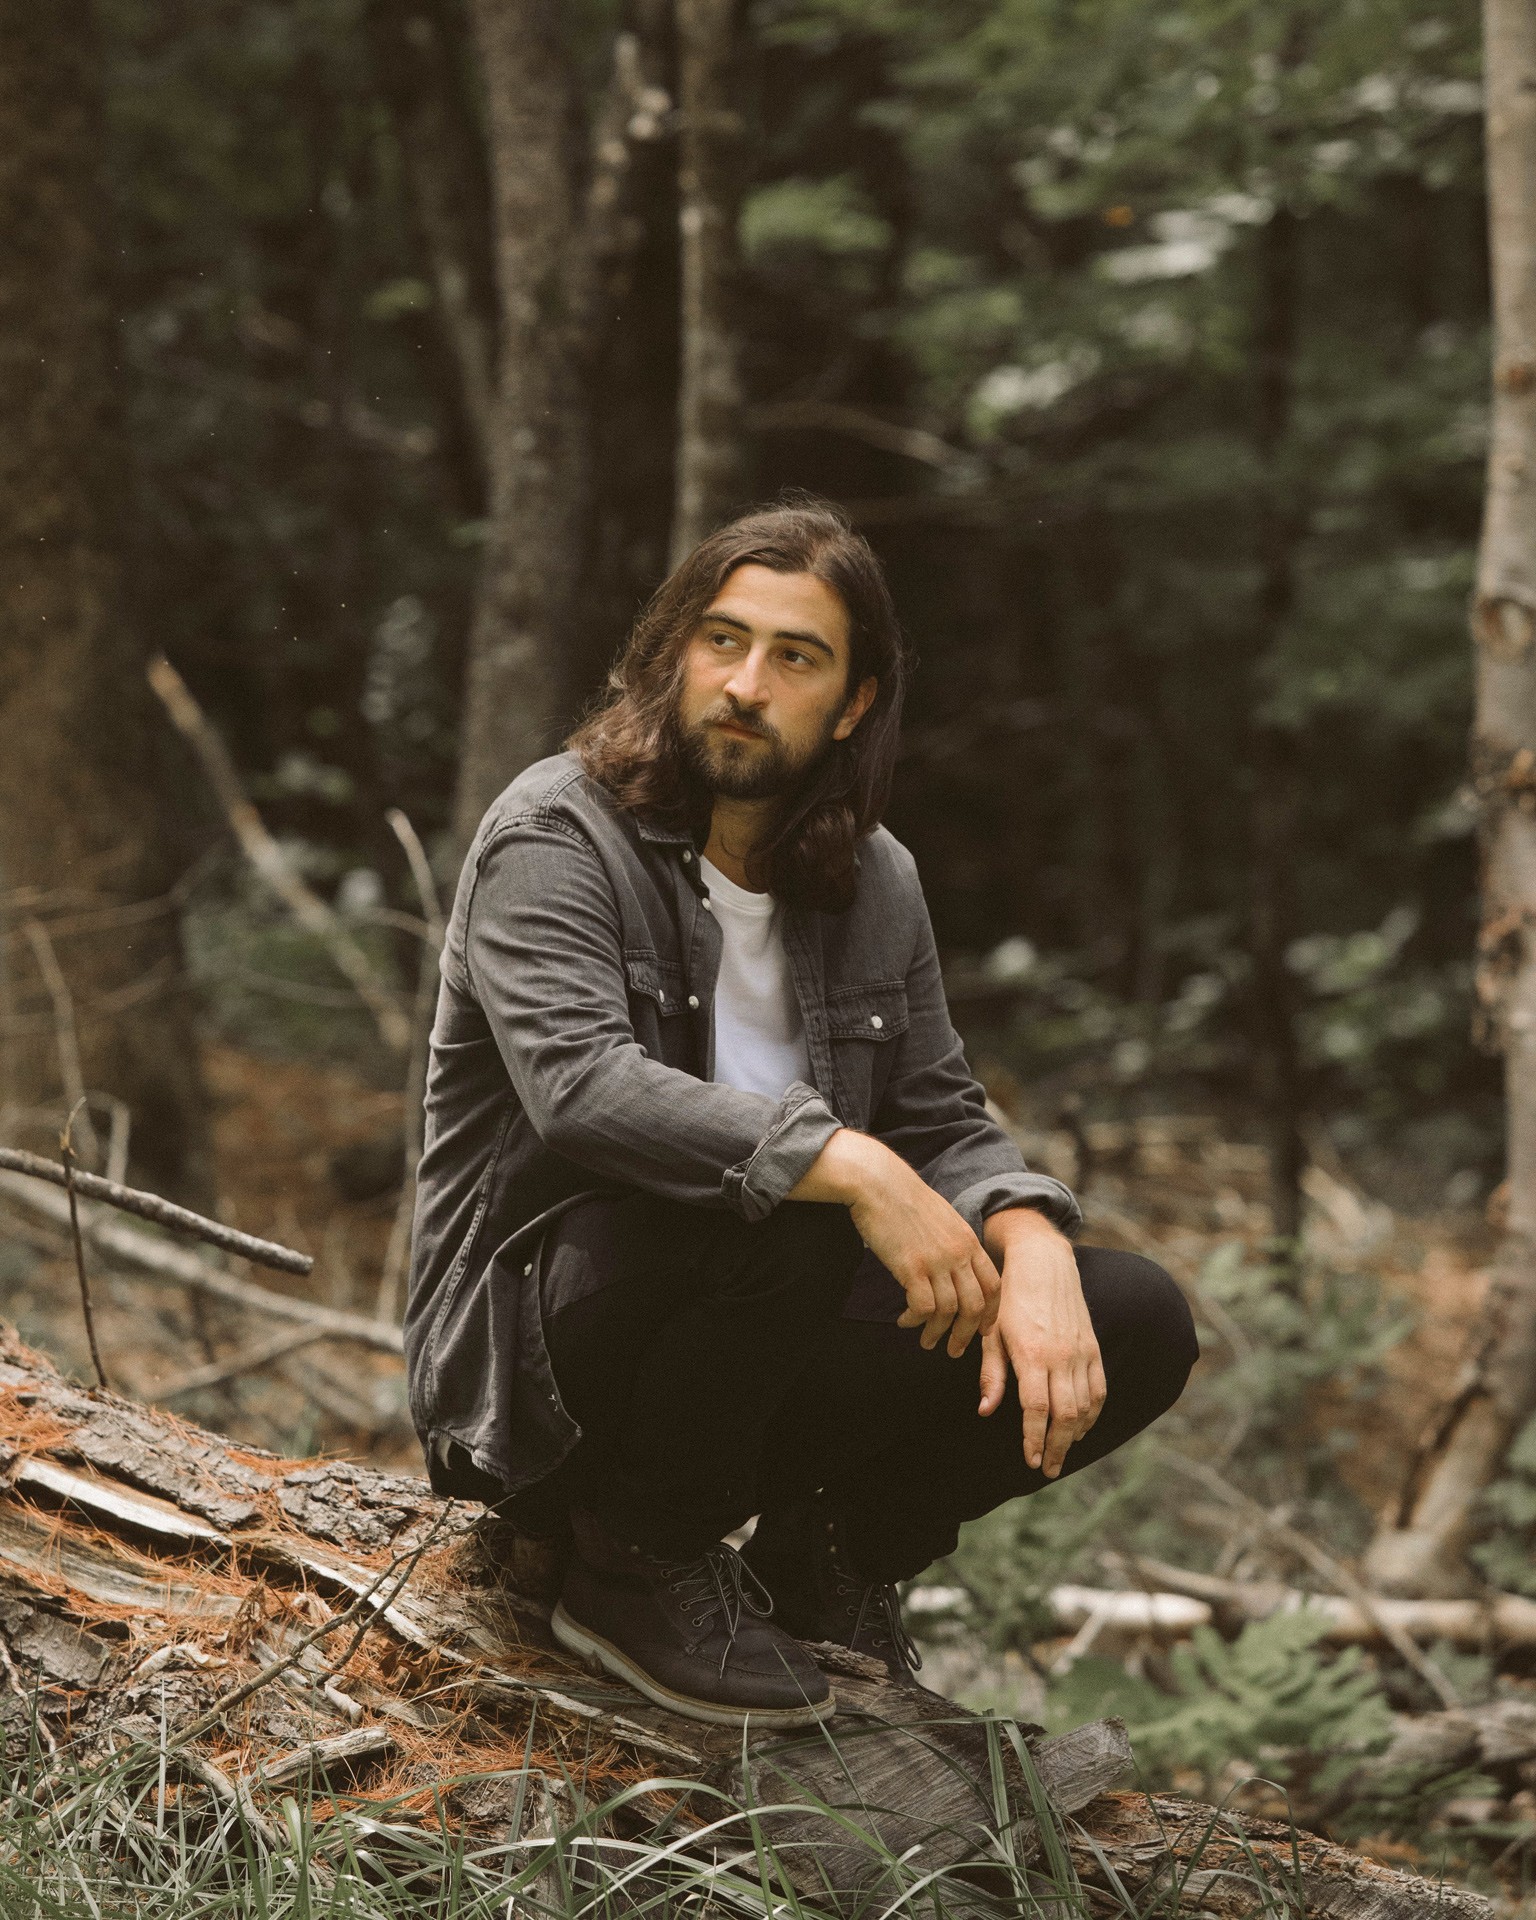 Noah Kahan's album Stick Season is about Vermont, but it also speaks to  small-town life in the Inland Northwest, Music News, Spokane, The  Pacific Northwest Inlander